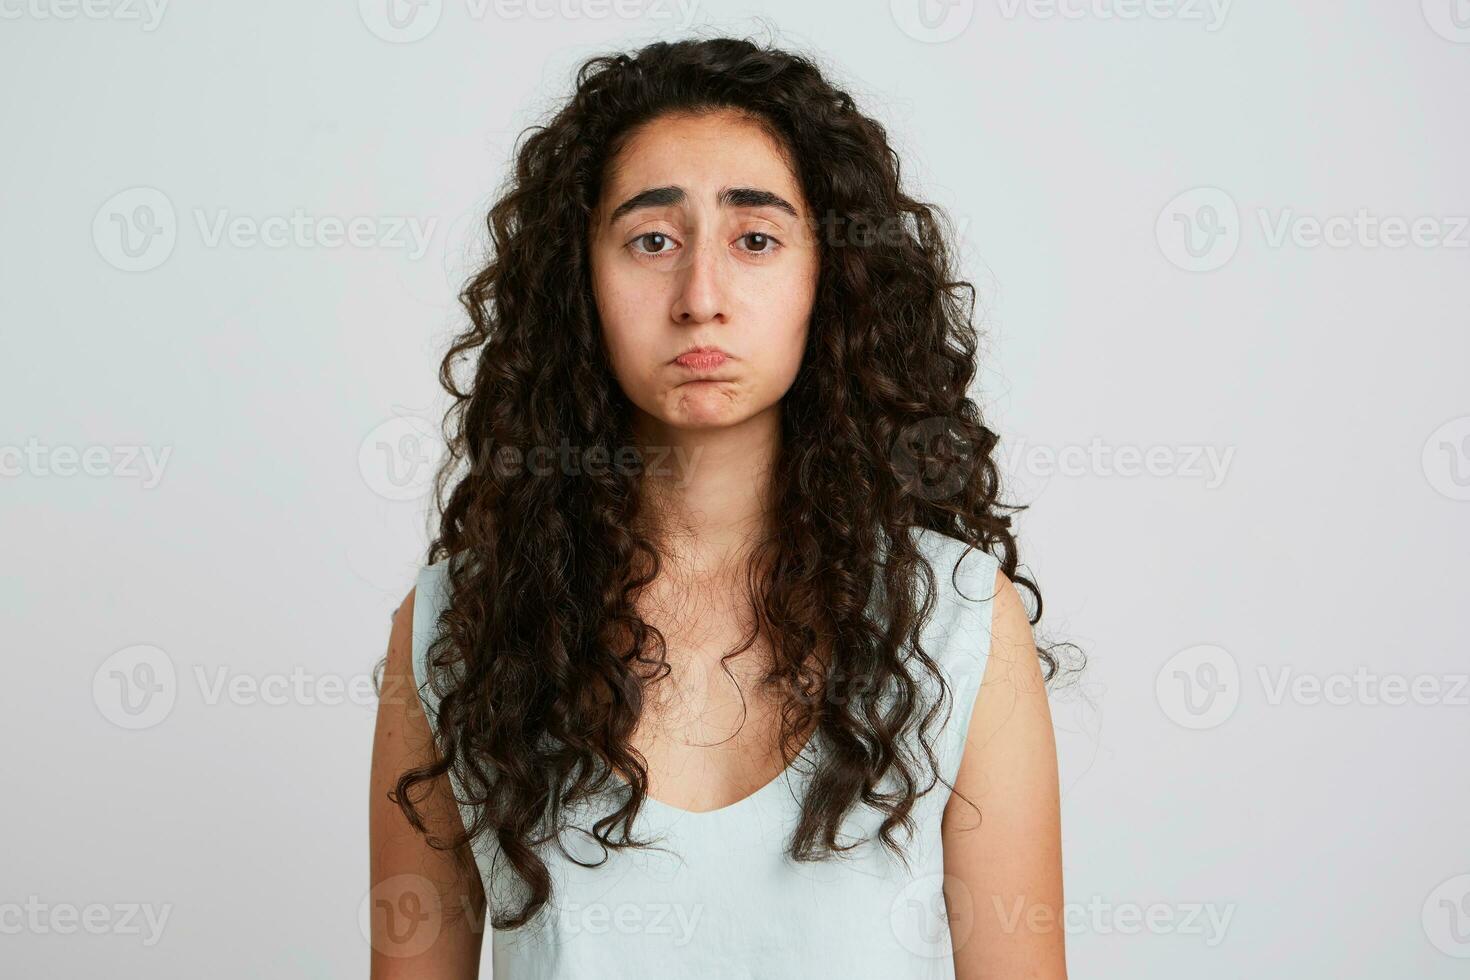 Closeup of sad unhappy young woman with long dark curly hair feels disappointed and have problems isolated over white wall Looks upset and depressed photo